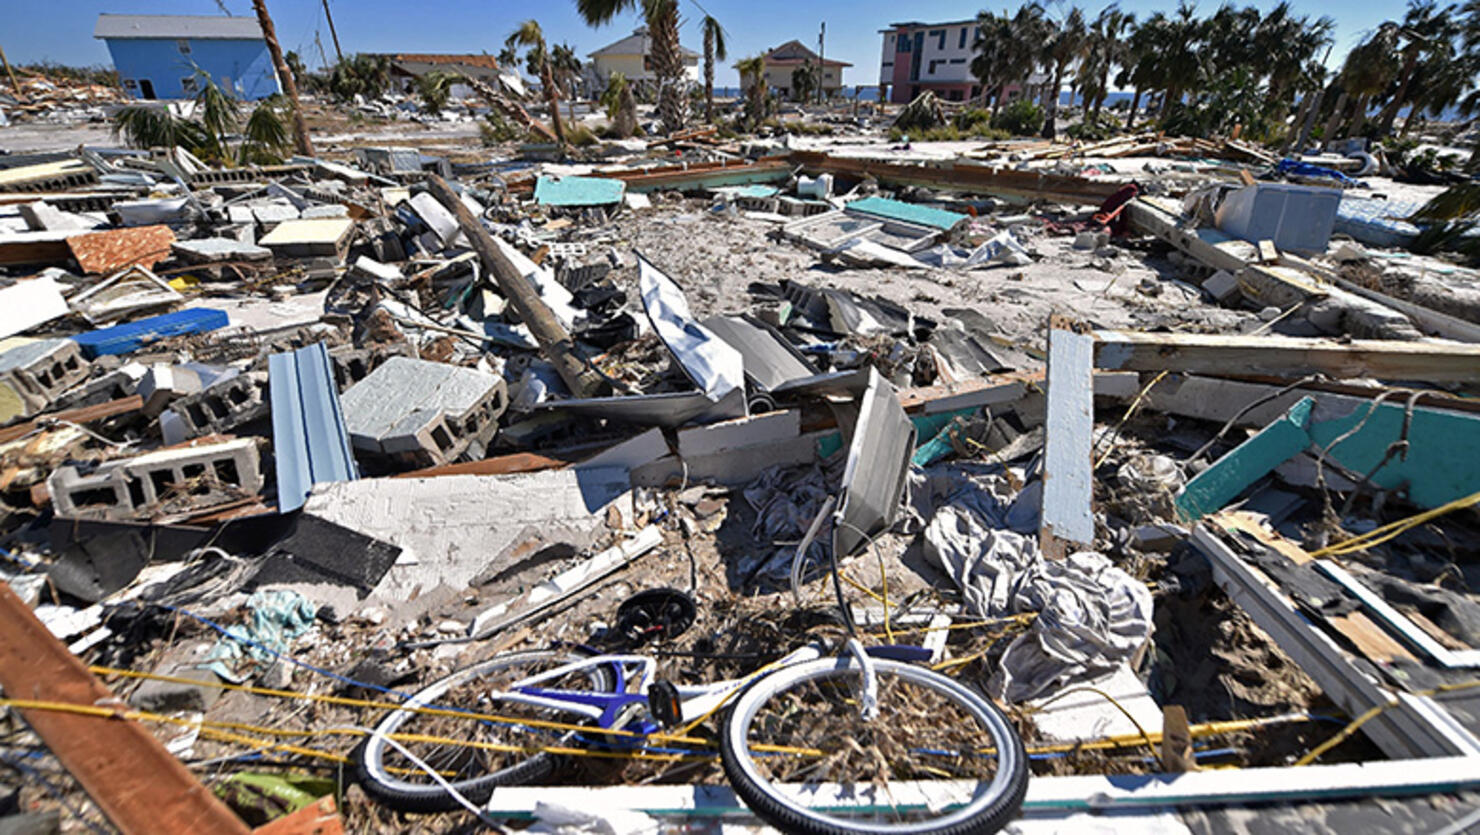 View of the damaged caused by Hurricane Michael in Mexico Beach, Florida,